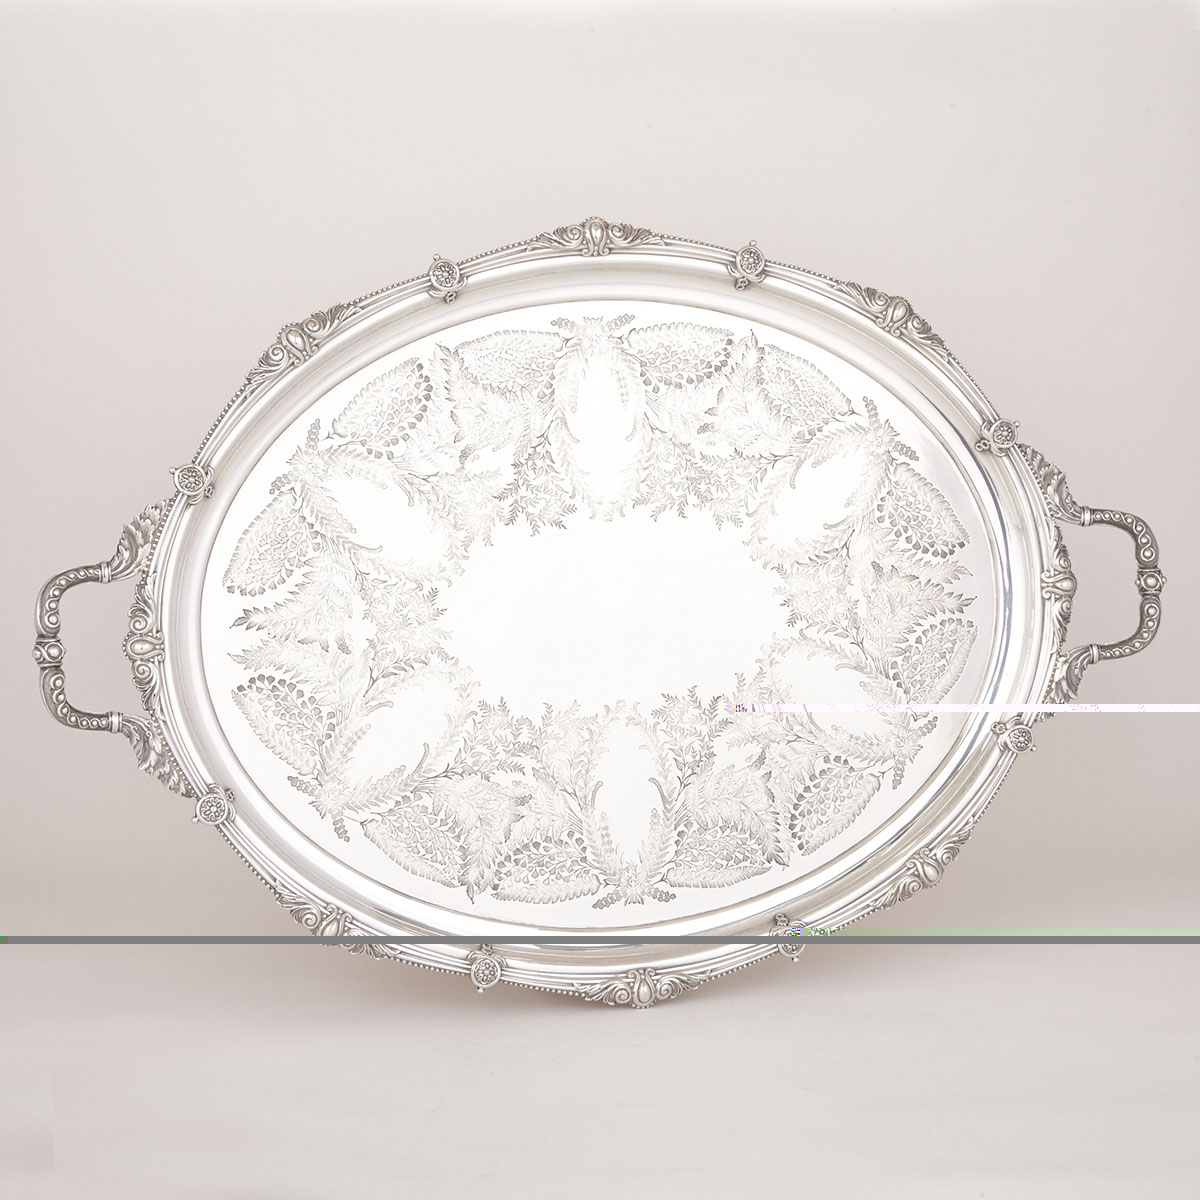 English Silver Plated Two-Handled Oval Serving Tray, Walker & Hall, c.1900